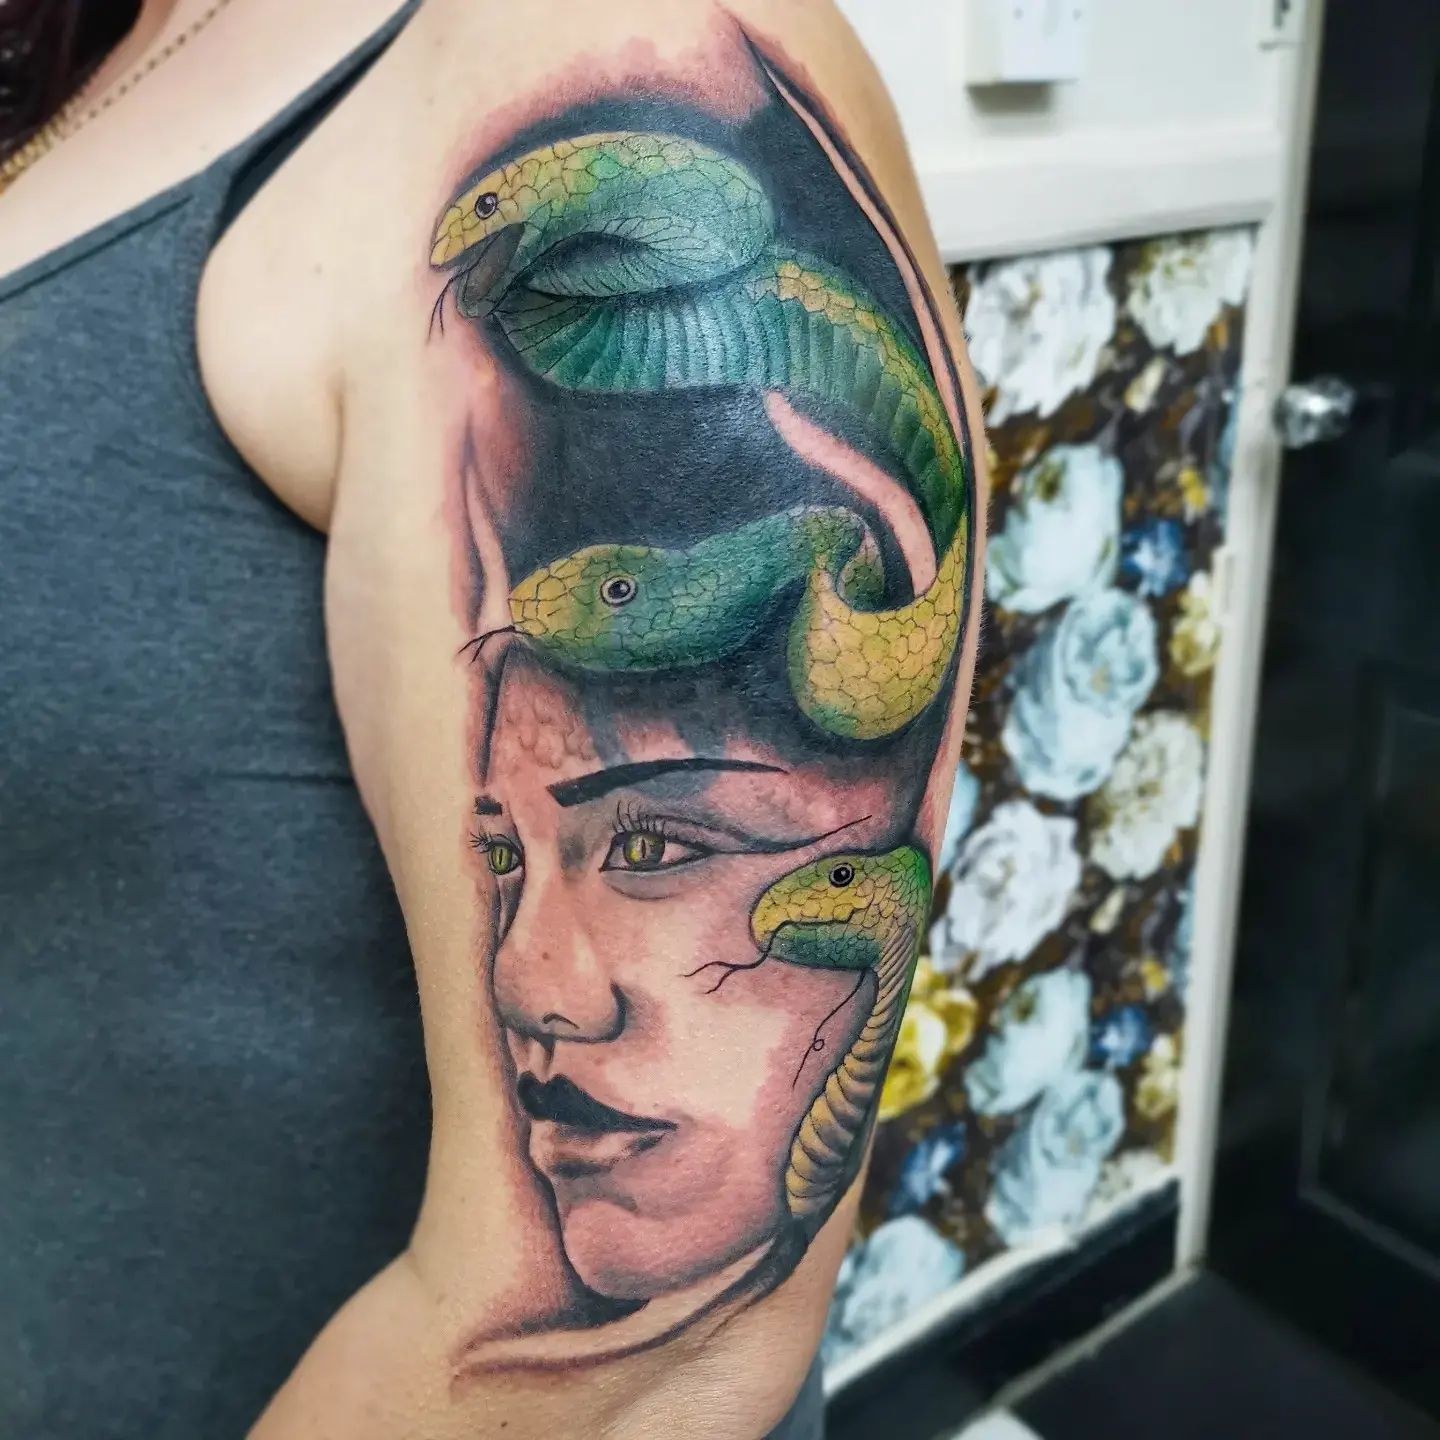 Are you for cover up tattoos? Here is an another Medusa design that stretches to your elbow from your shoulder. The bright-colored snakes are ready to catch your attention easily with different shades of green.